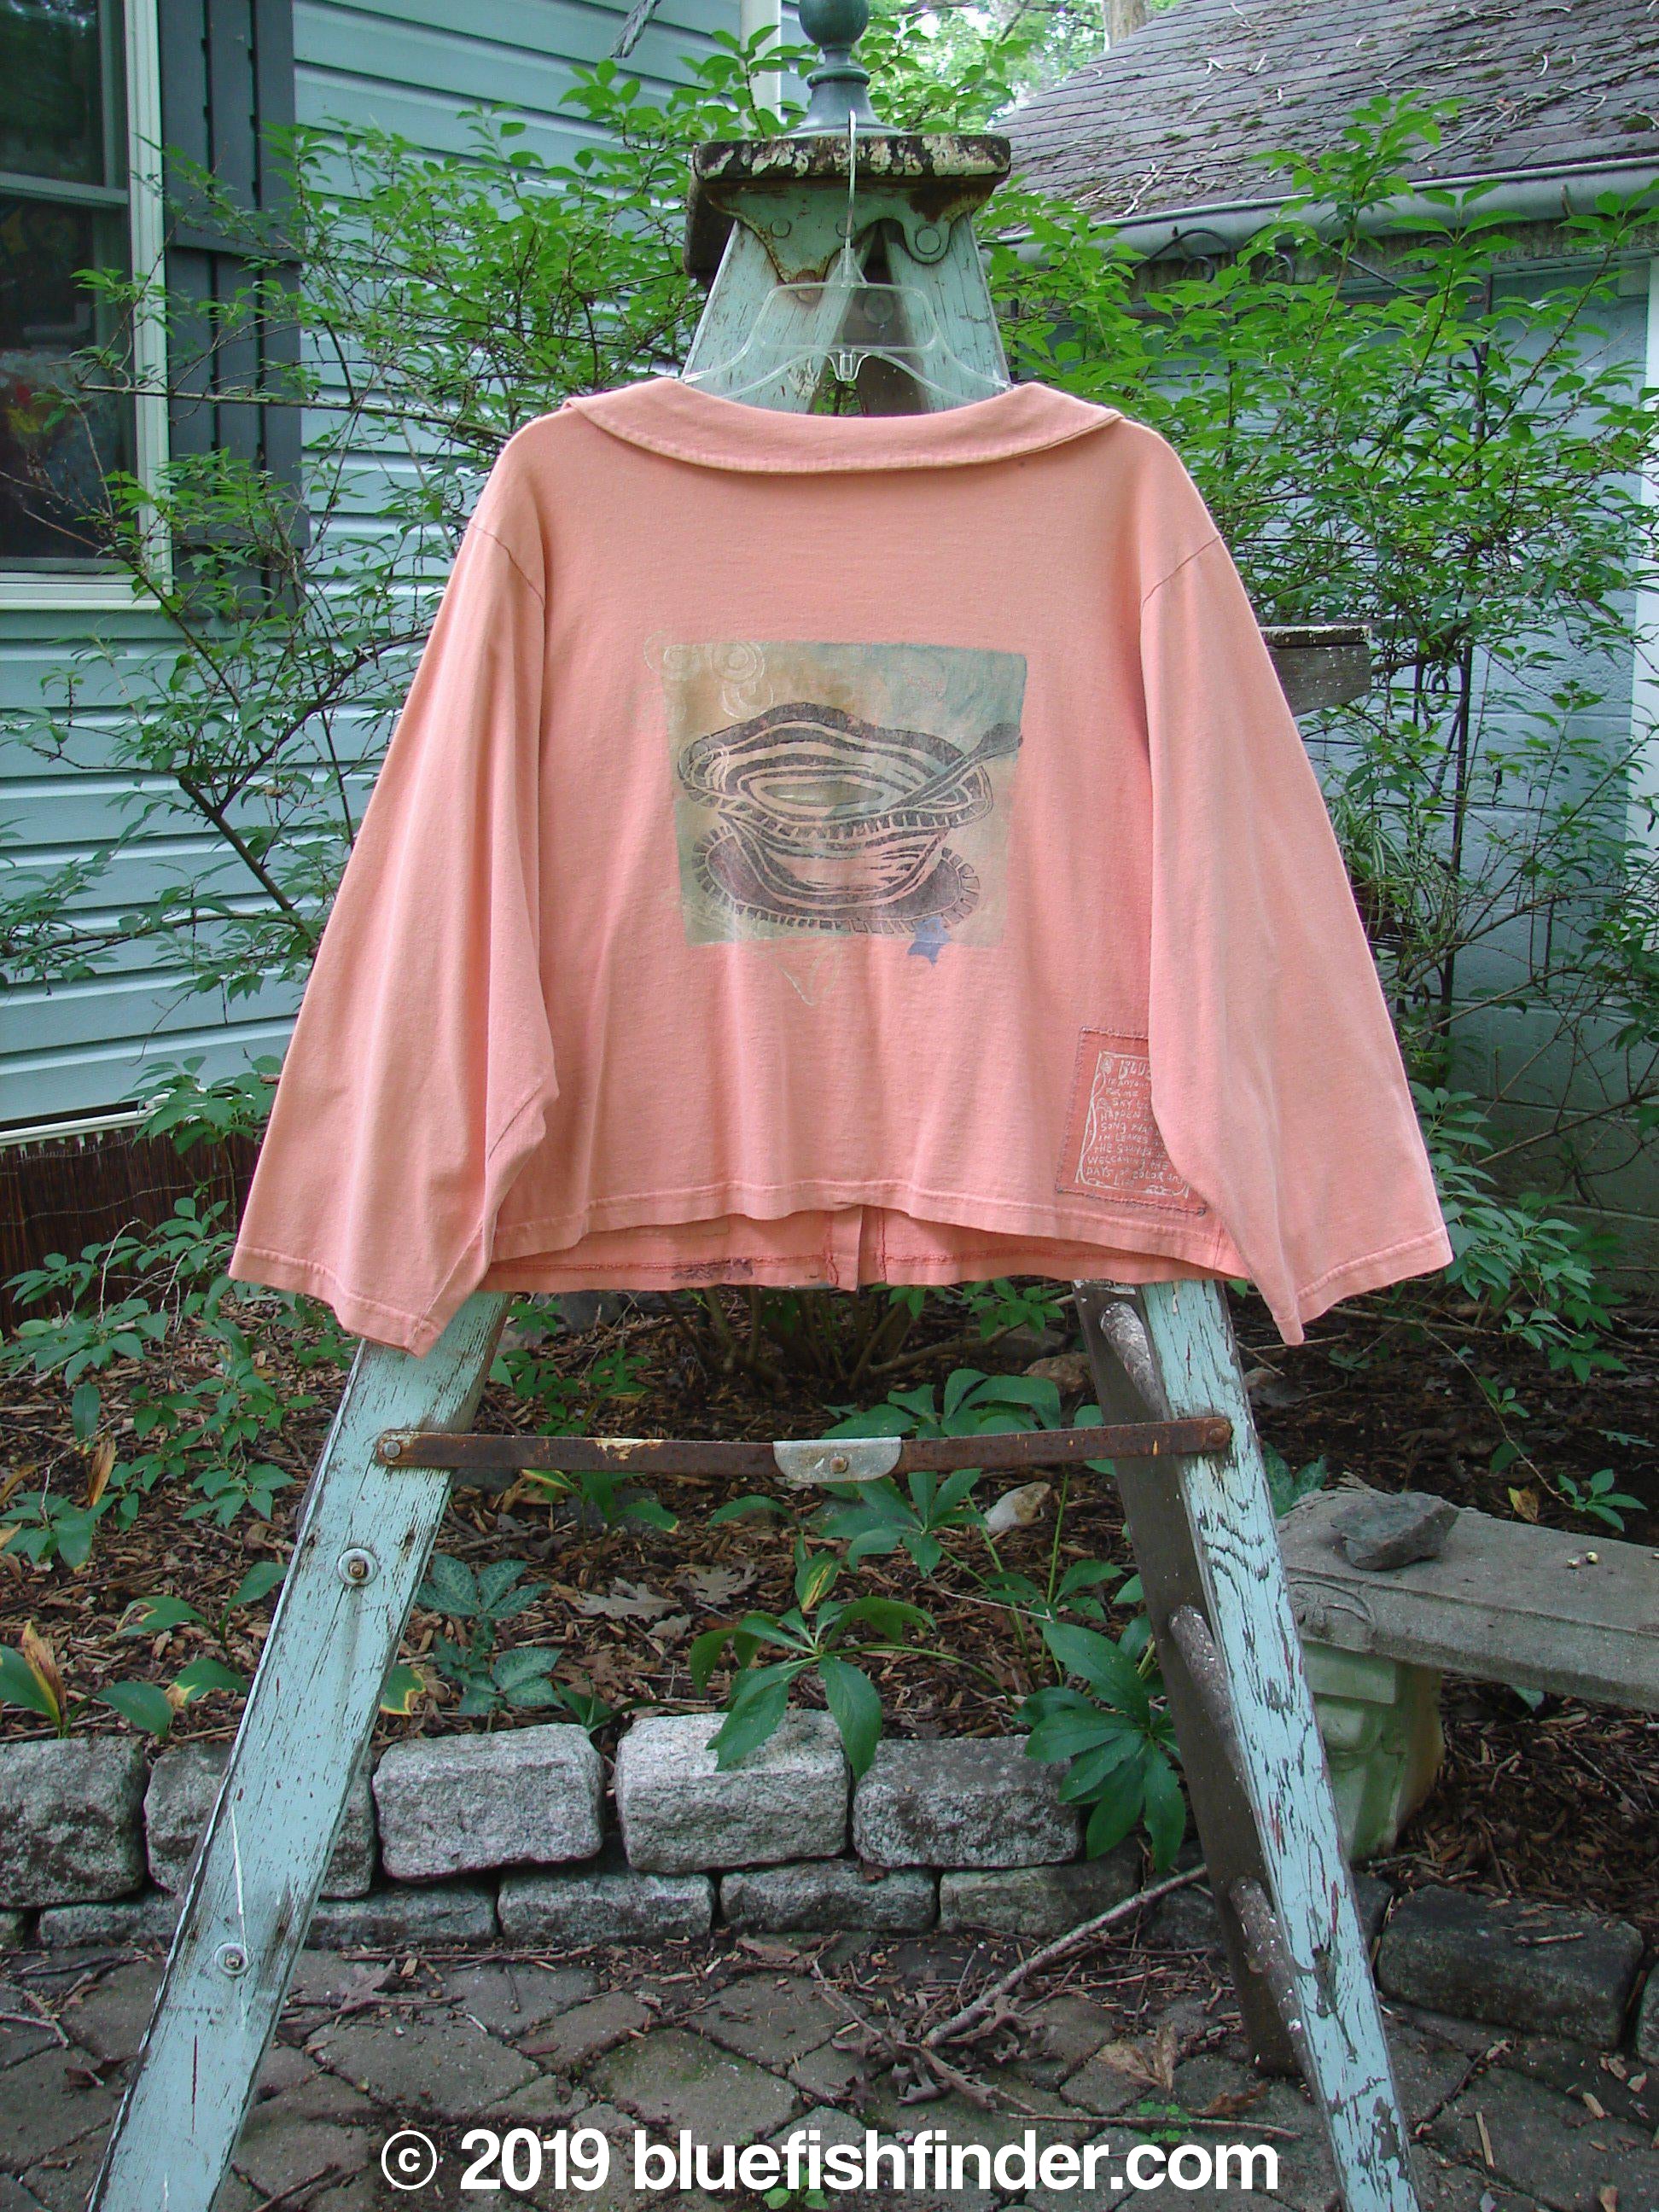 Image alt text: "1994 Box Pocket Jacket in Reef, featuring a pink jacket with a unique collar, oversized front pockets, and vintage buttons. Cropped and boxy shape with Blue Fish patch and 1994 paint."